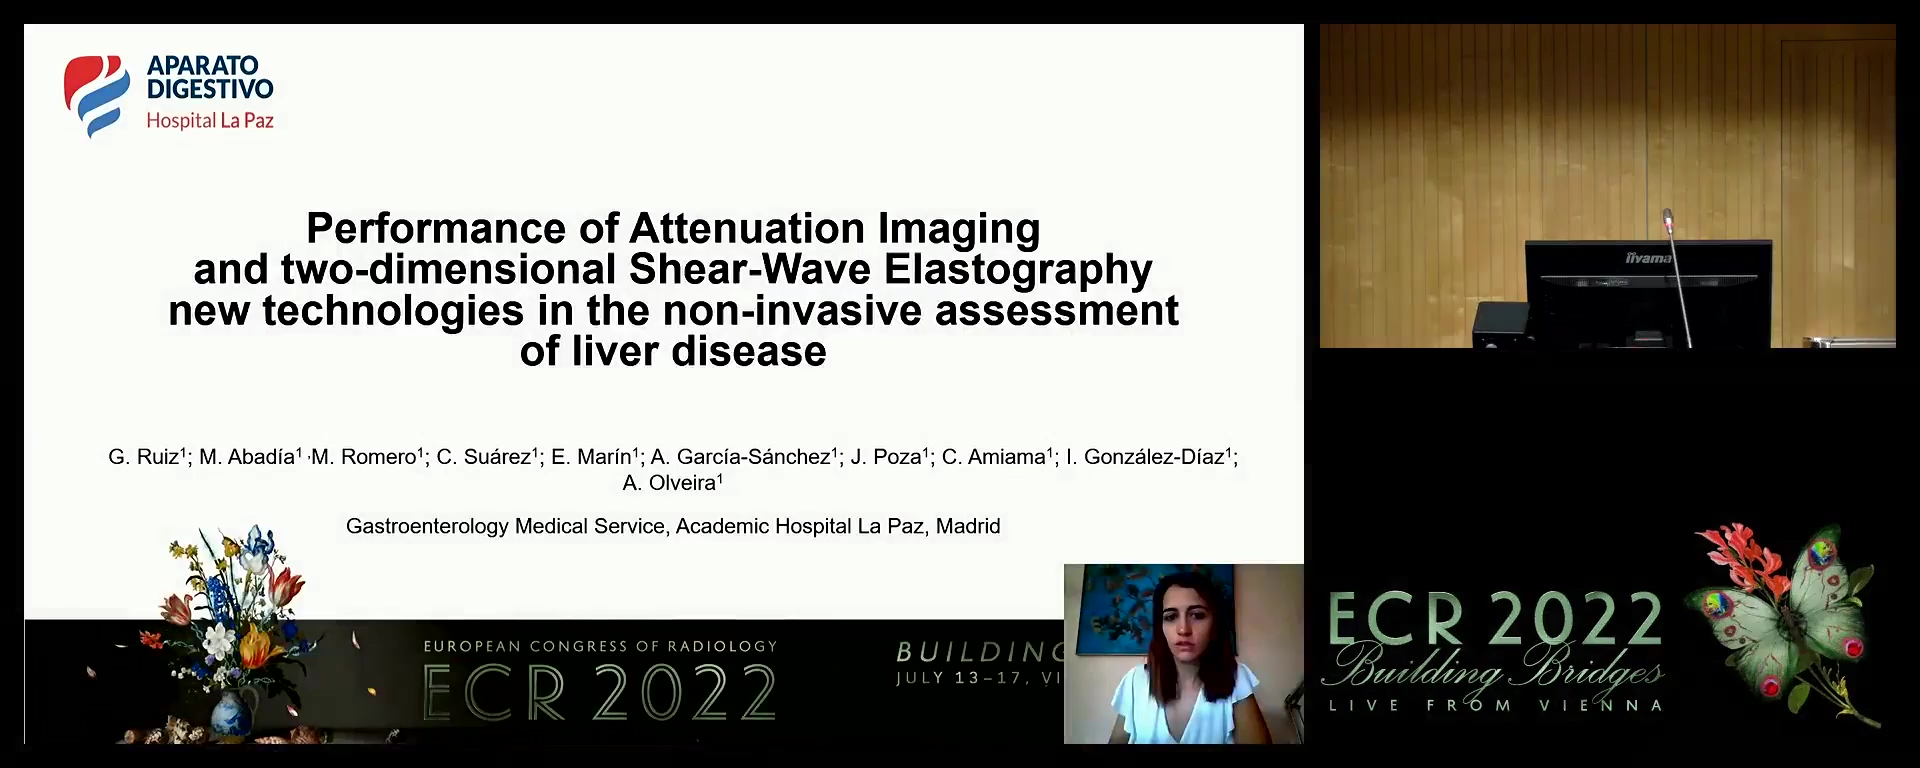 Performance of attenuation imaging and two-dimensional shear-wave elastography new technologies in the noninvasive assessment of liver disease